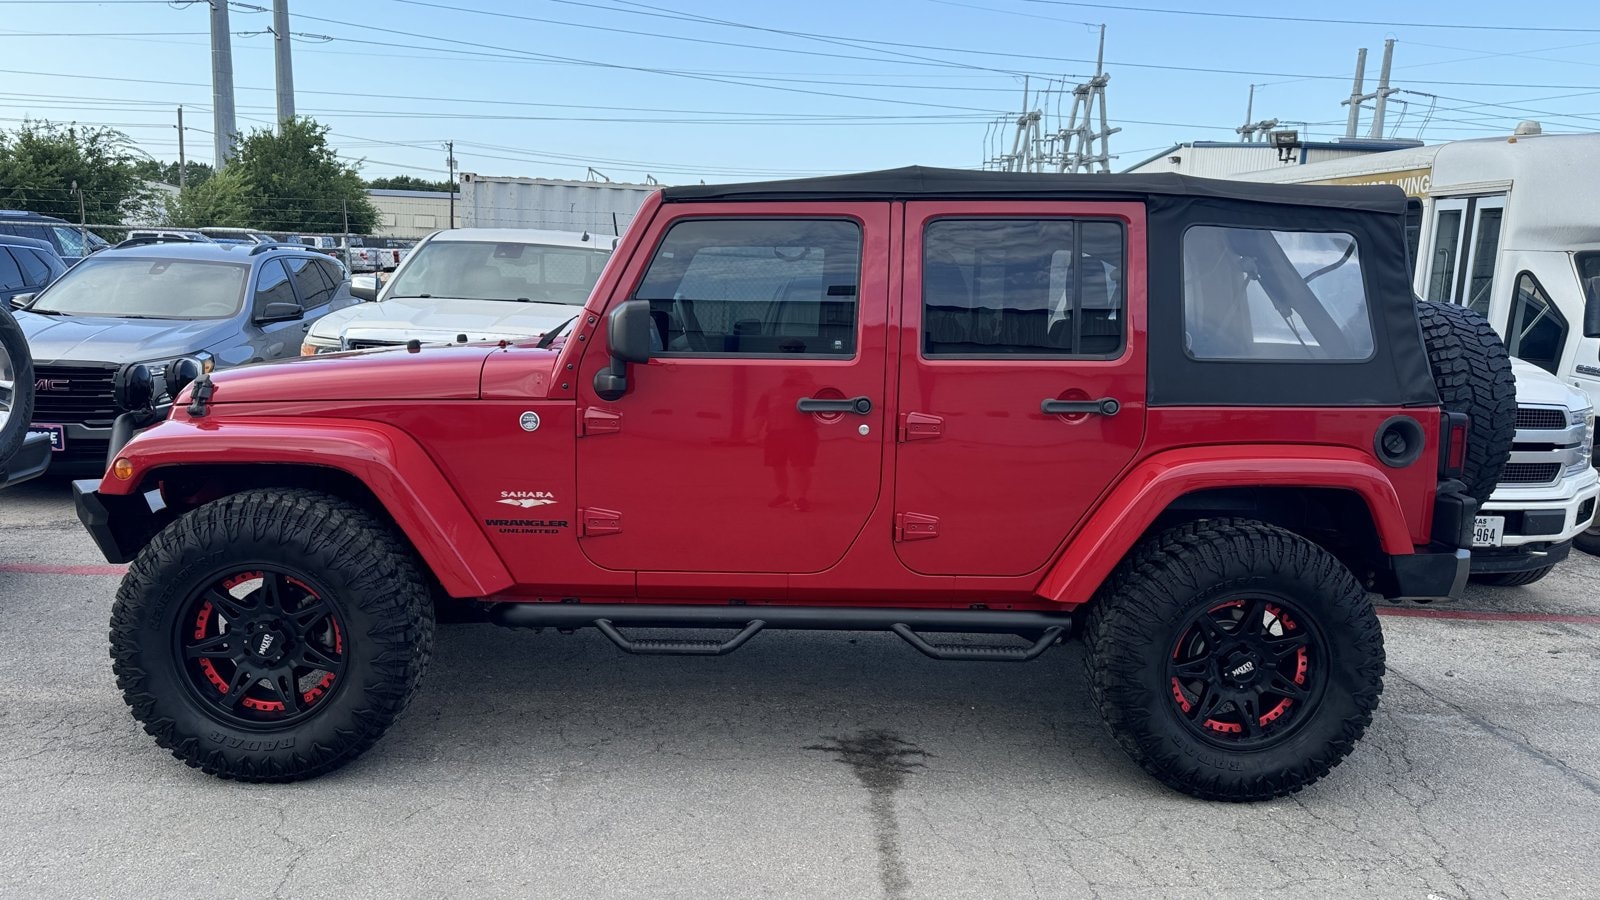 Used 2014 Jeep Wrangler Unlimited Altitude with VIN 1C4BJWEGXEL301976 for sale in Burleson, TX